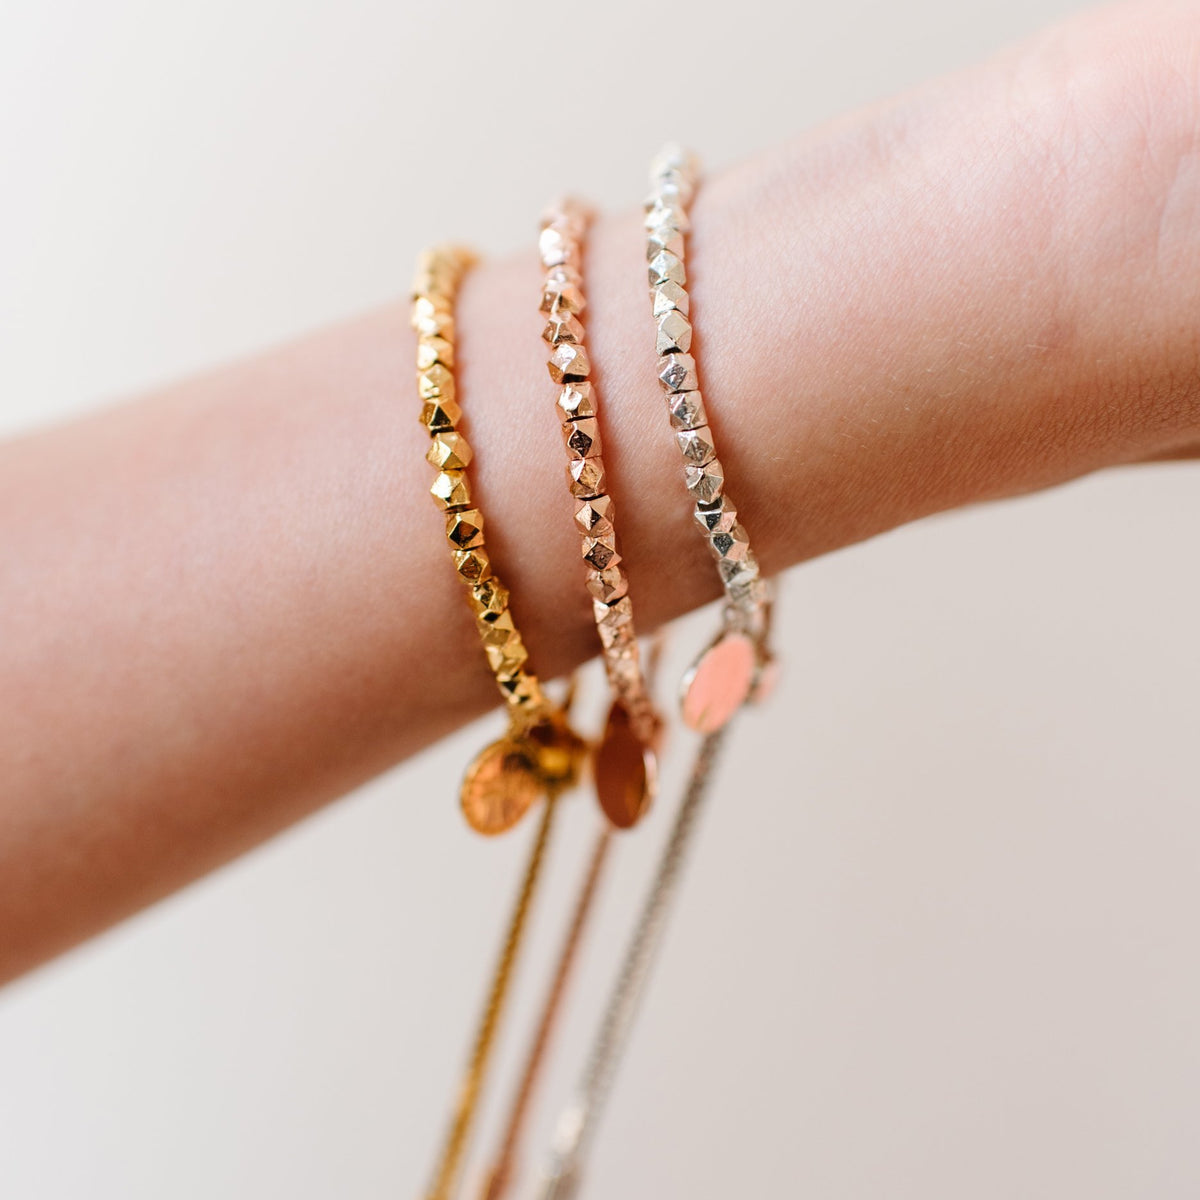 DAY 10 - POISE NUGGET ADJUSTABLE BRACELET - GOLD, ROSE GOLD, OR SILVER - SO PRETTY CARA COTTER